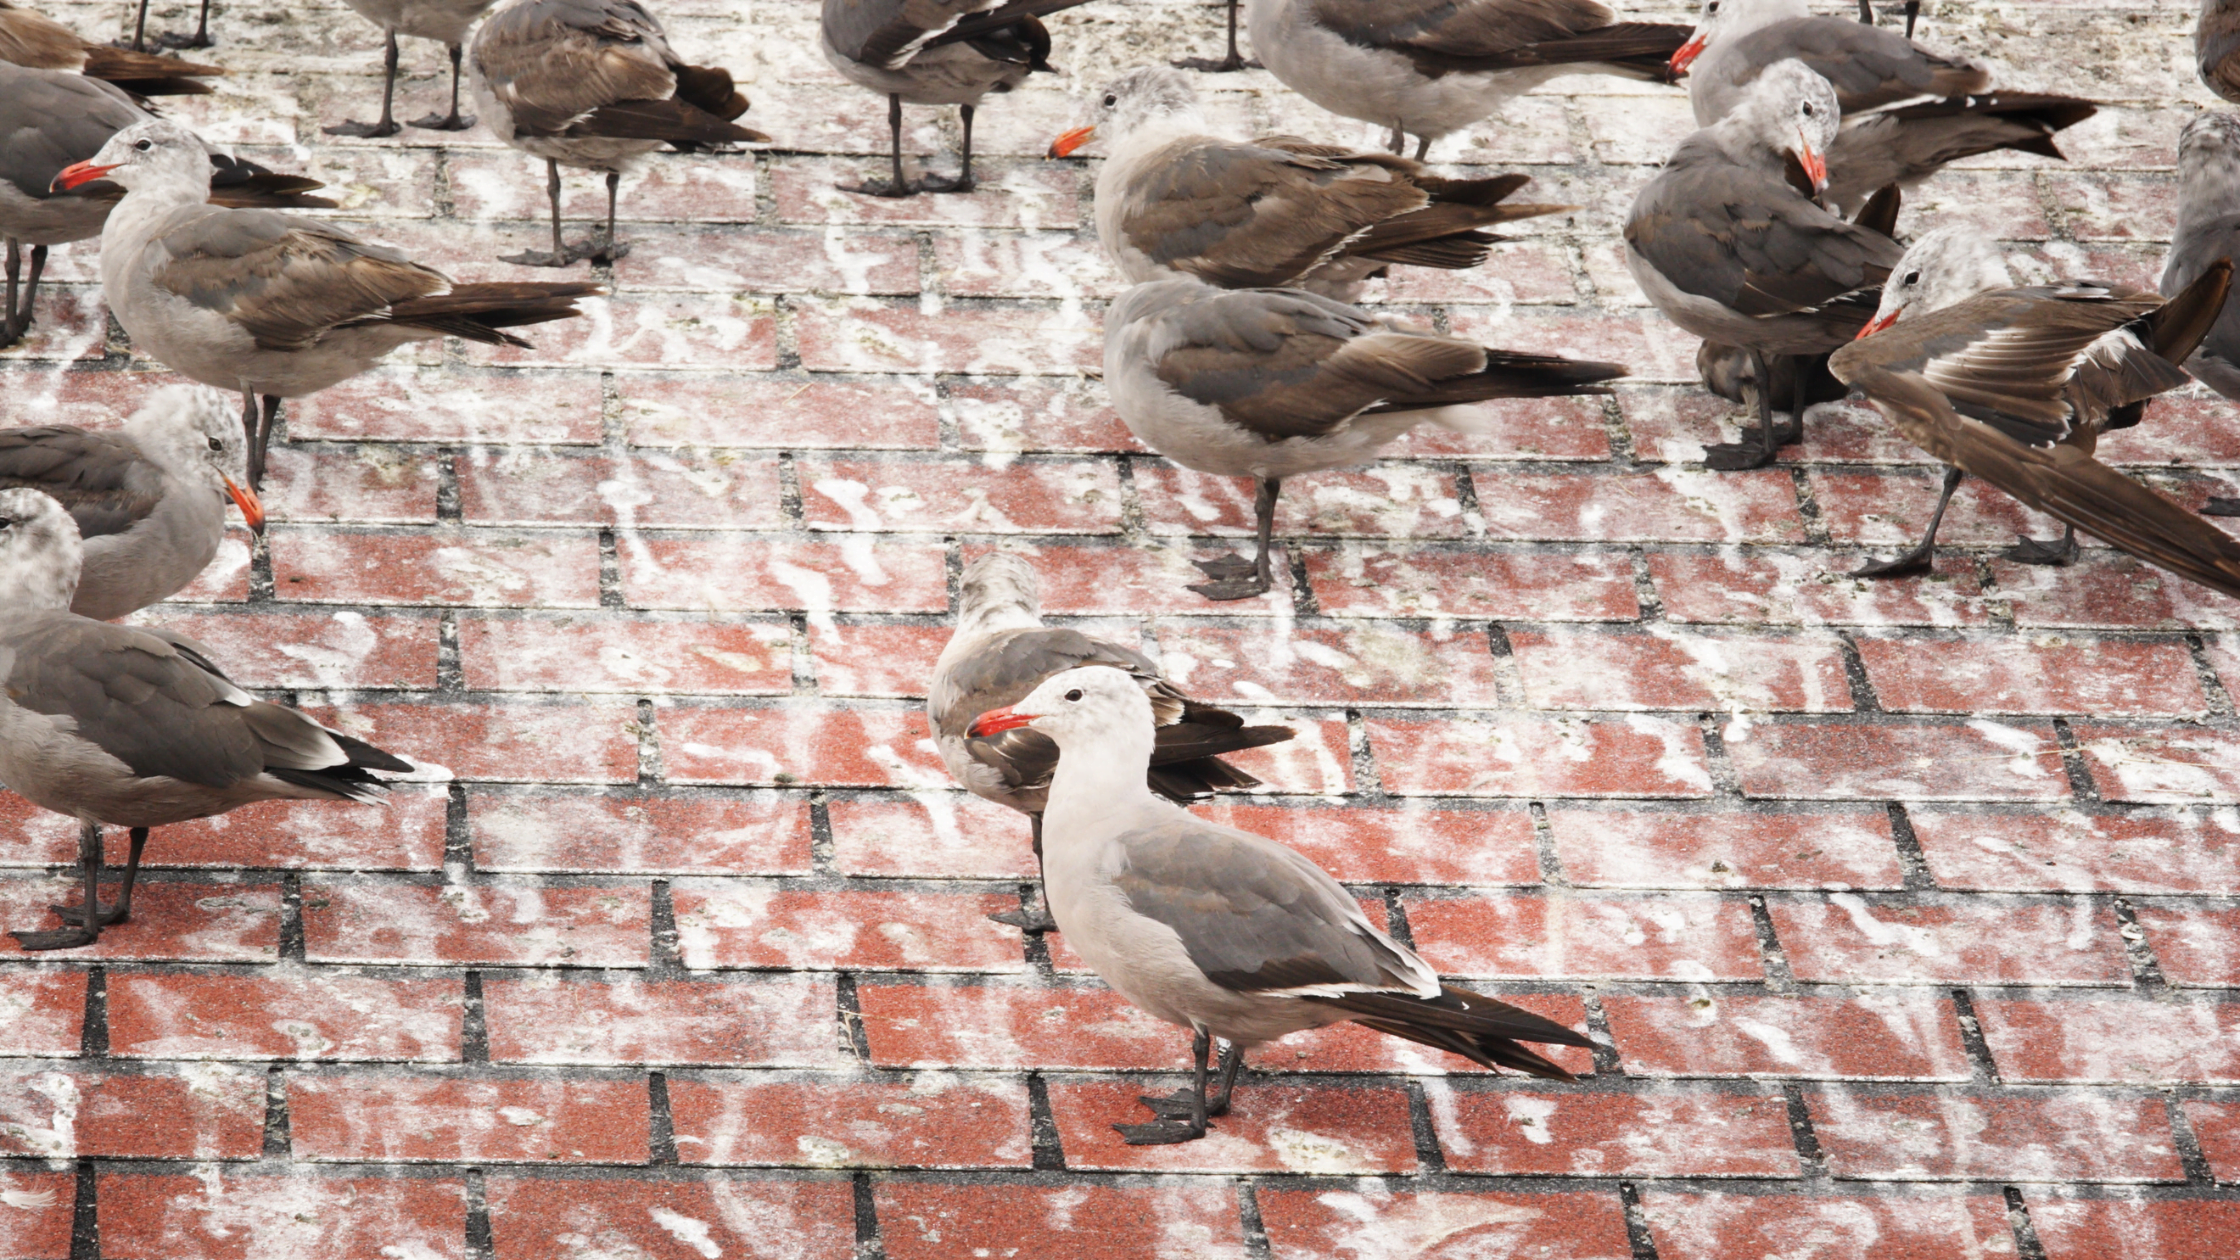 Gulls gather on paving that needs guano removal